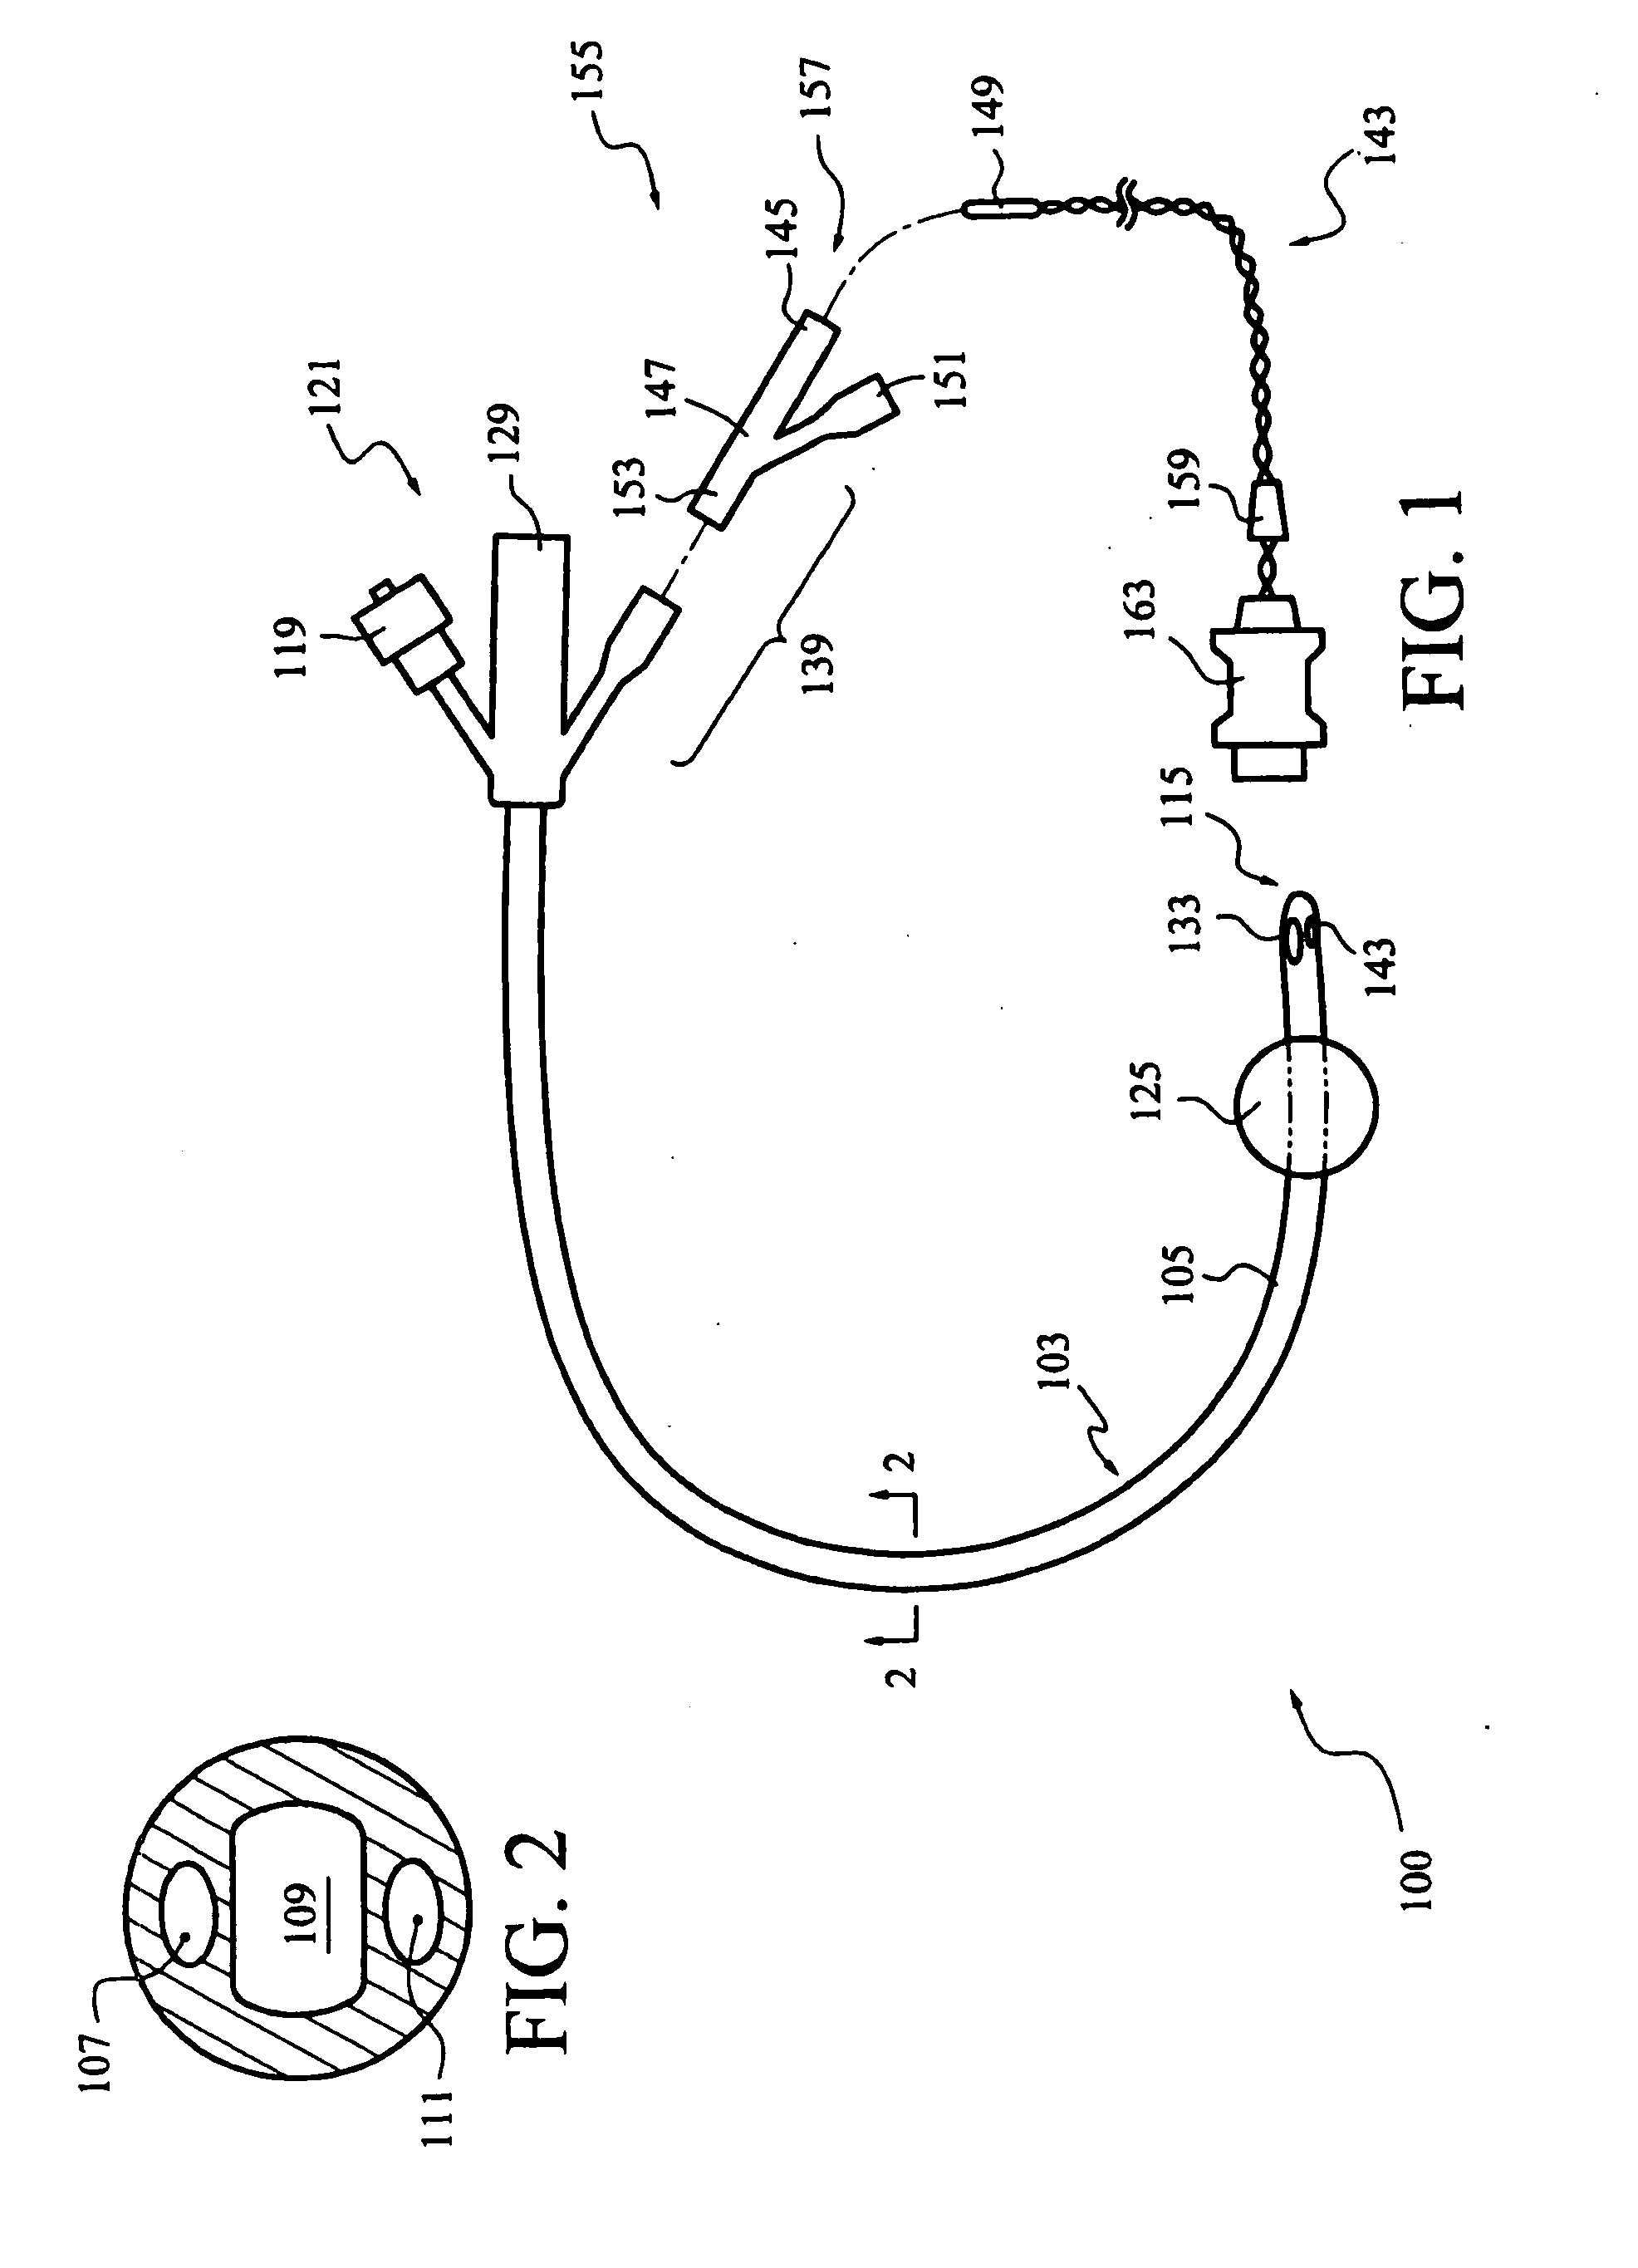 Continuous Intra-Abdominal Pressure Monitoring Urinary Catheter With Optional Core Temperature Sensor